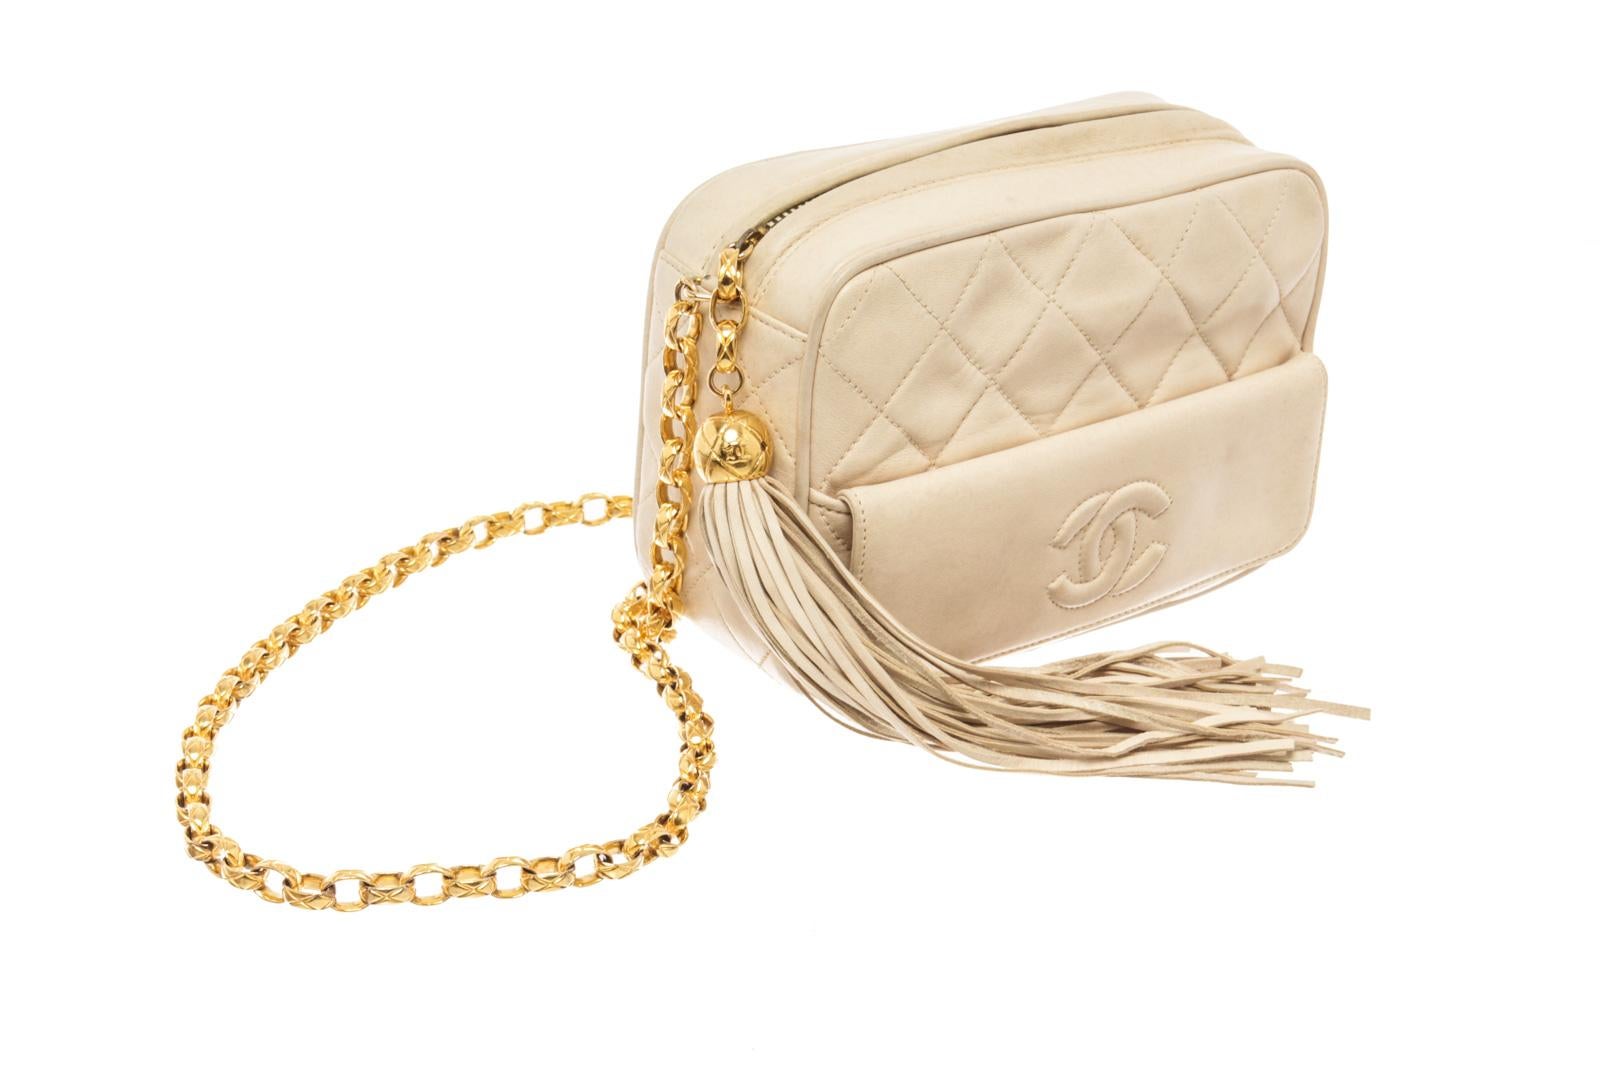 Chanel Cream Lambskin Tassel Camera Shoulder Bag with Neutrals Lambskin, Front flap pocket with Interlocking CC Logo & Quilted Pattern, Gold-Tone Hardware, Interior leather with one zip pocket, gold chain Single Shoulder Strap, Tassel Accents,